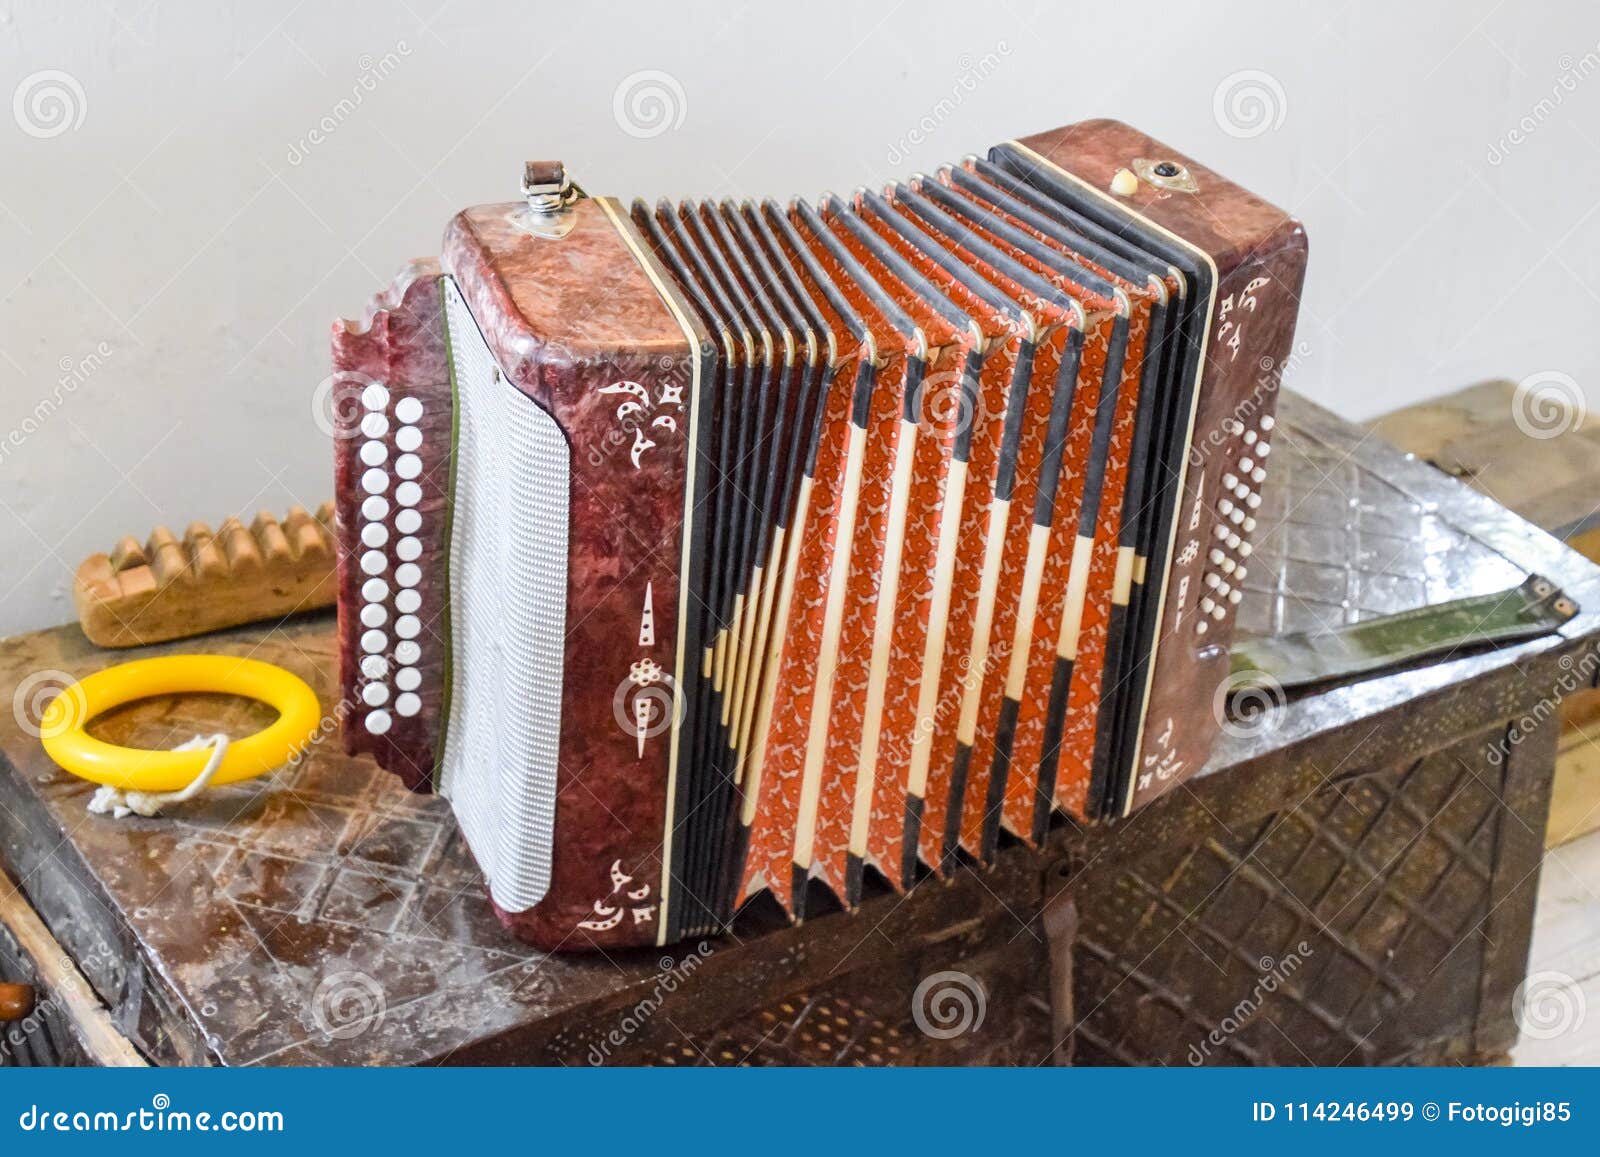 The Accordion Is In Its Own Case Stock Image - Image of classical